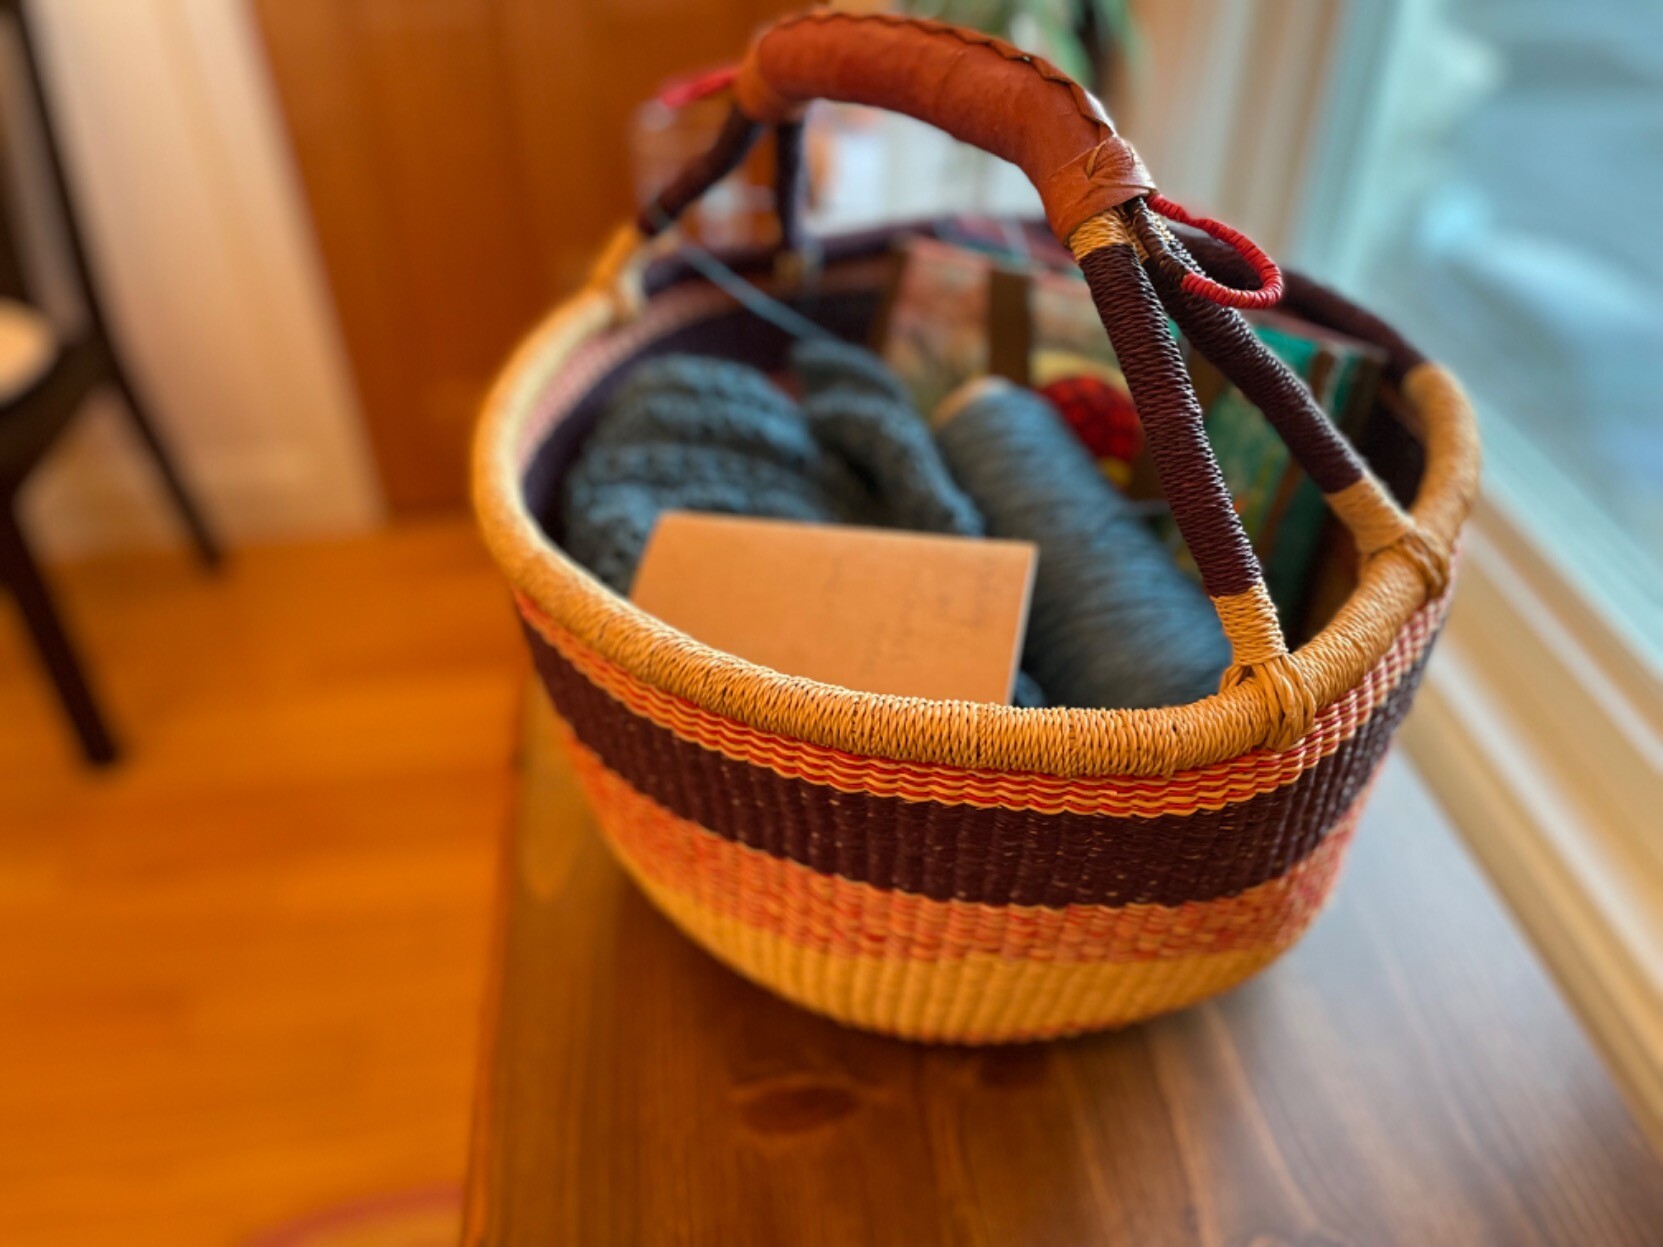 A round basket with a handle. Inside is a spool of blue yarn, some bit of knitted fabric, and a small notebook.